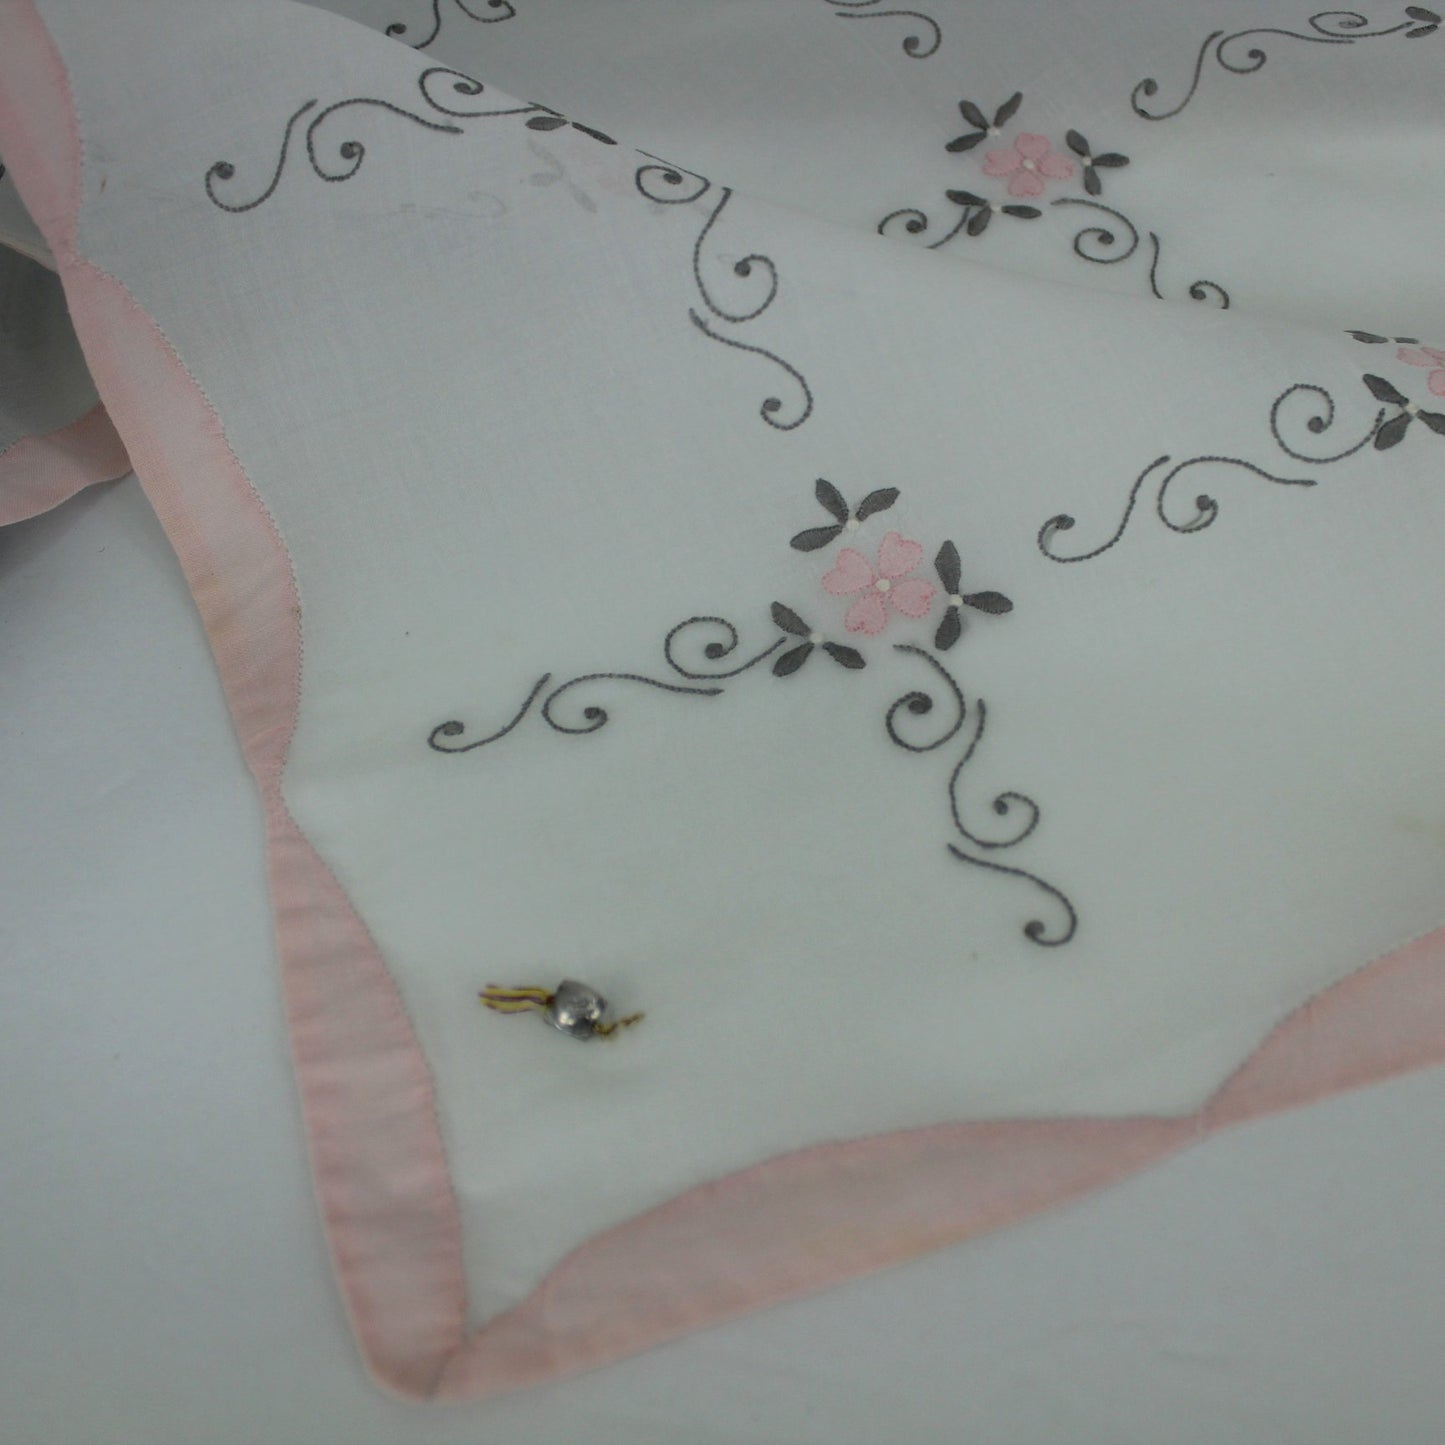 Elegant Small White Organdy Table Cloth Embroidery Pink Flower Applique Metal Label "I"